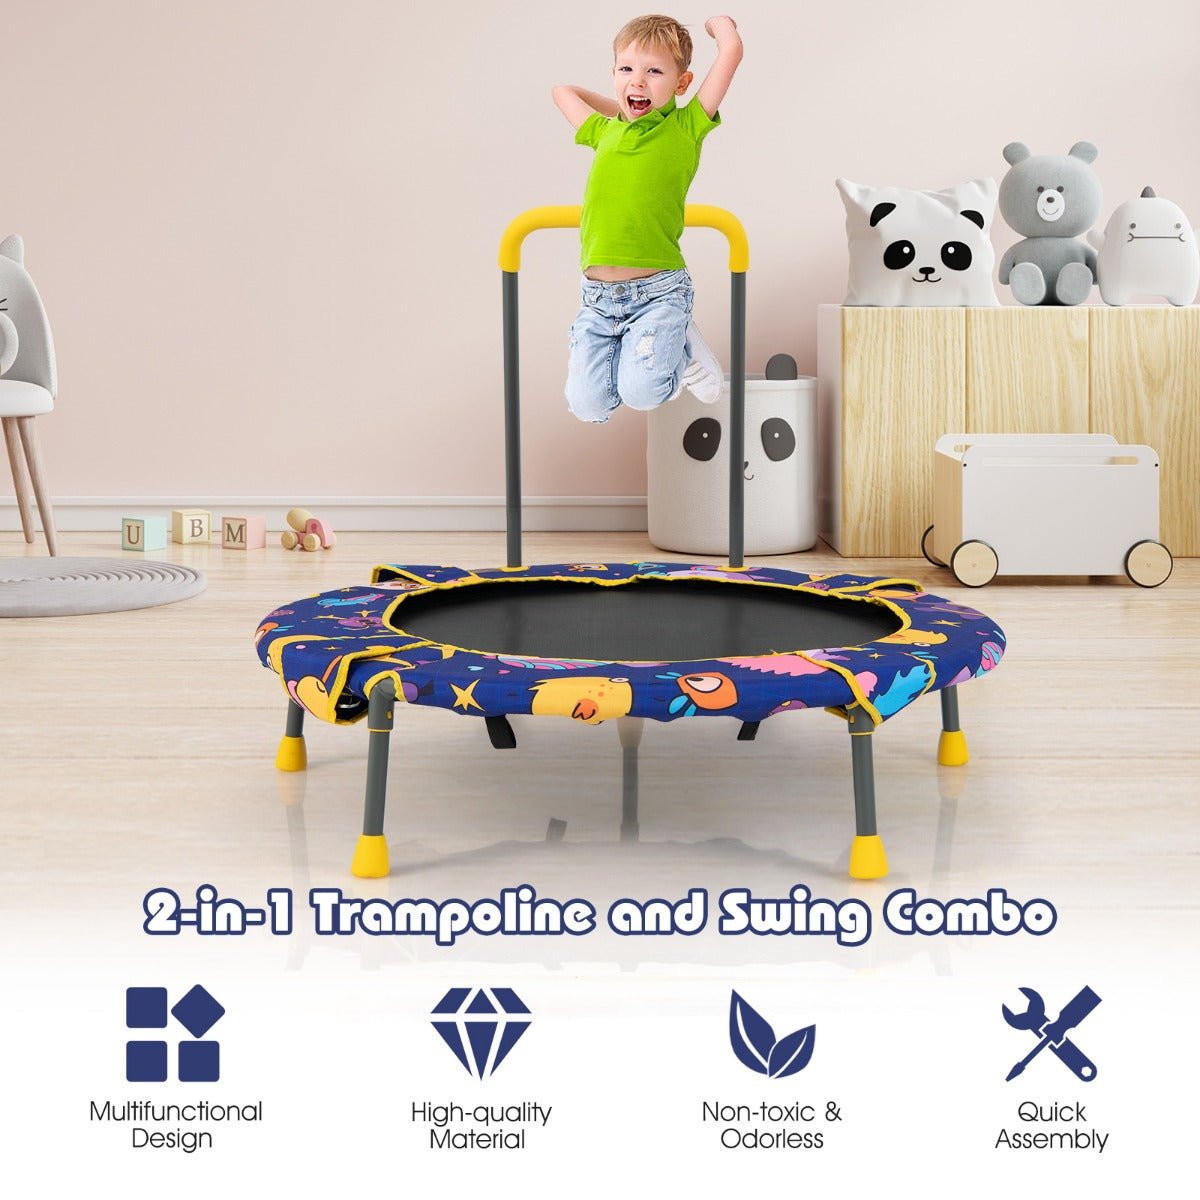 Elevate Playtime: Convertible Swing and Trampoline Set with Upholstered Handrail for Kids